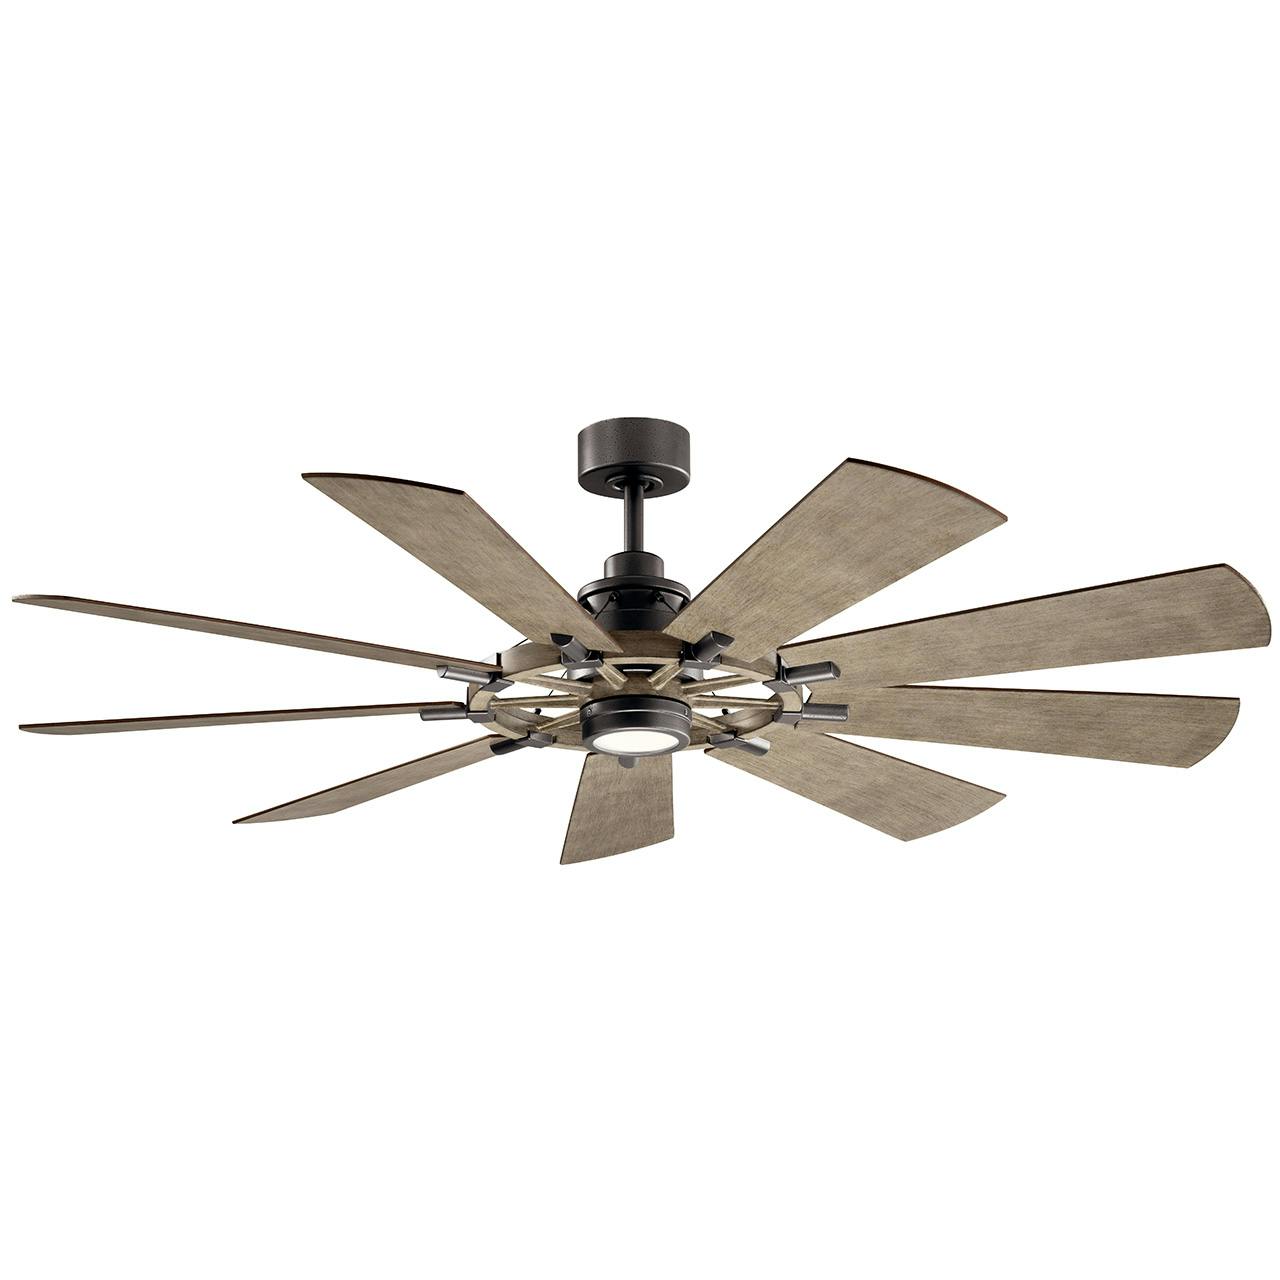 Gentry LED 65" 9 Blade Fan in Anvil Iron on a white background